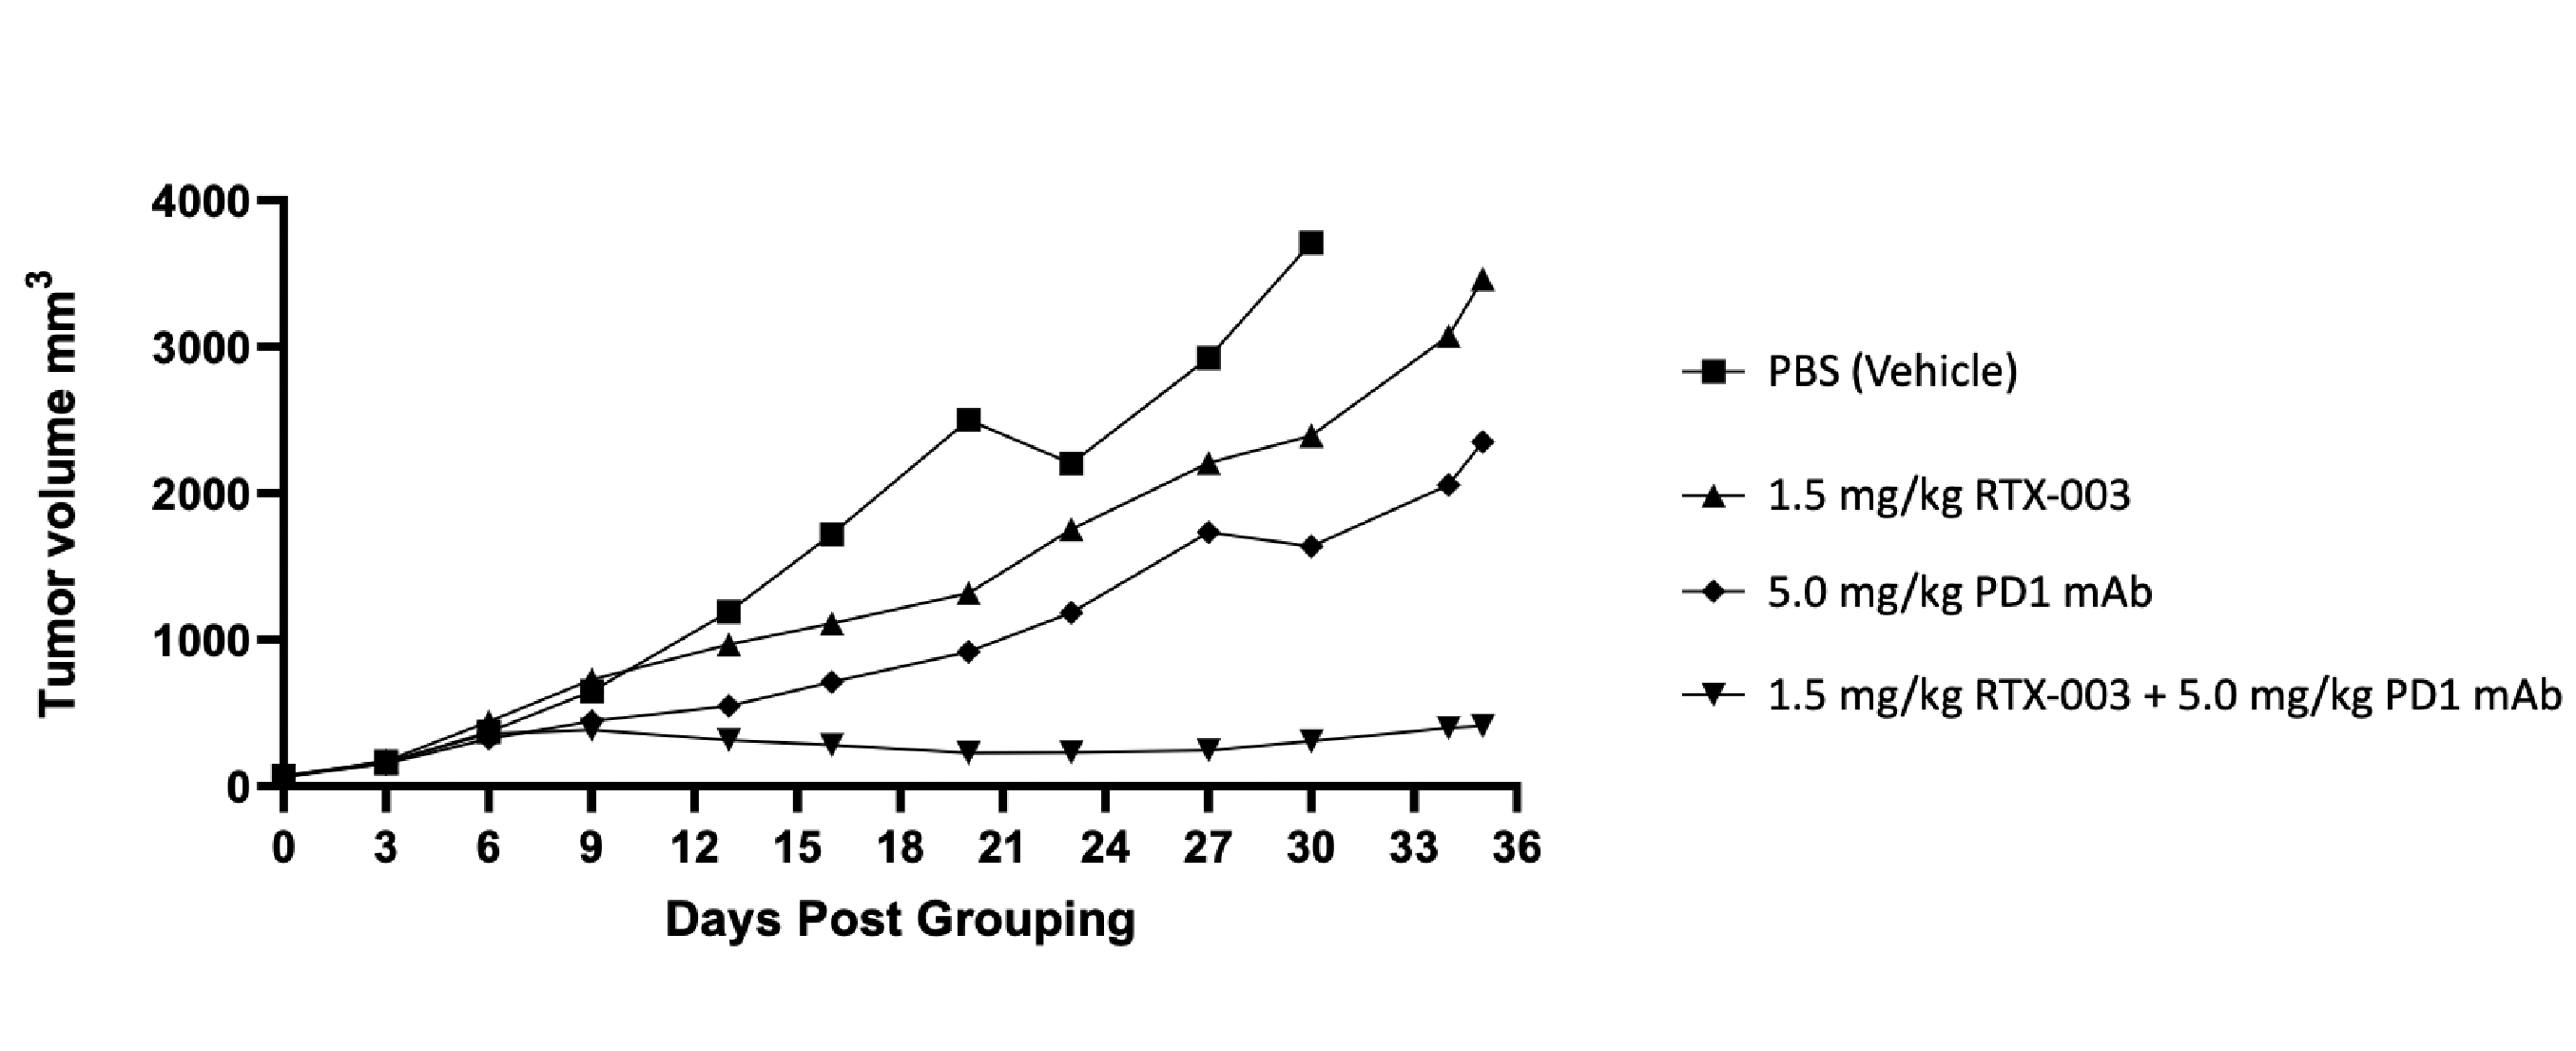 Line graph of Tumor volume to Days Post Grouping. Minimal tumor growth observed when treated with RTX-003/PD1 mAb. Tumor volume increased when treated with either RTX-003 or PD1 mAb but were still lower than PBS samples.